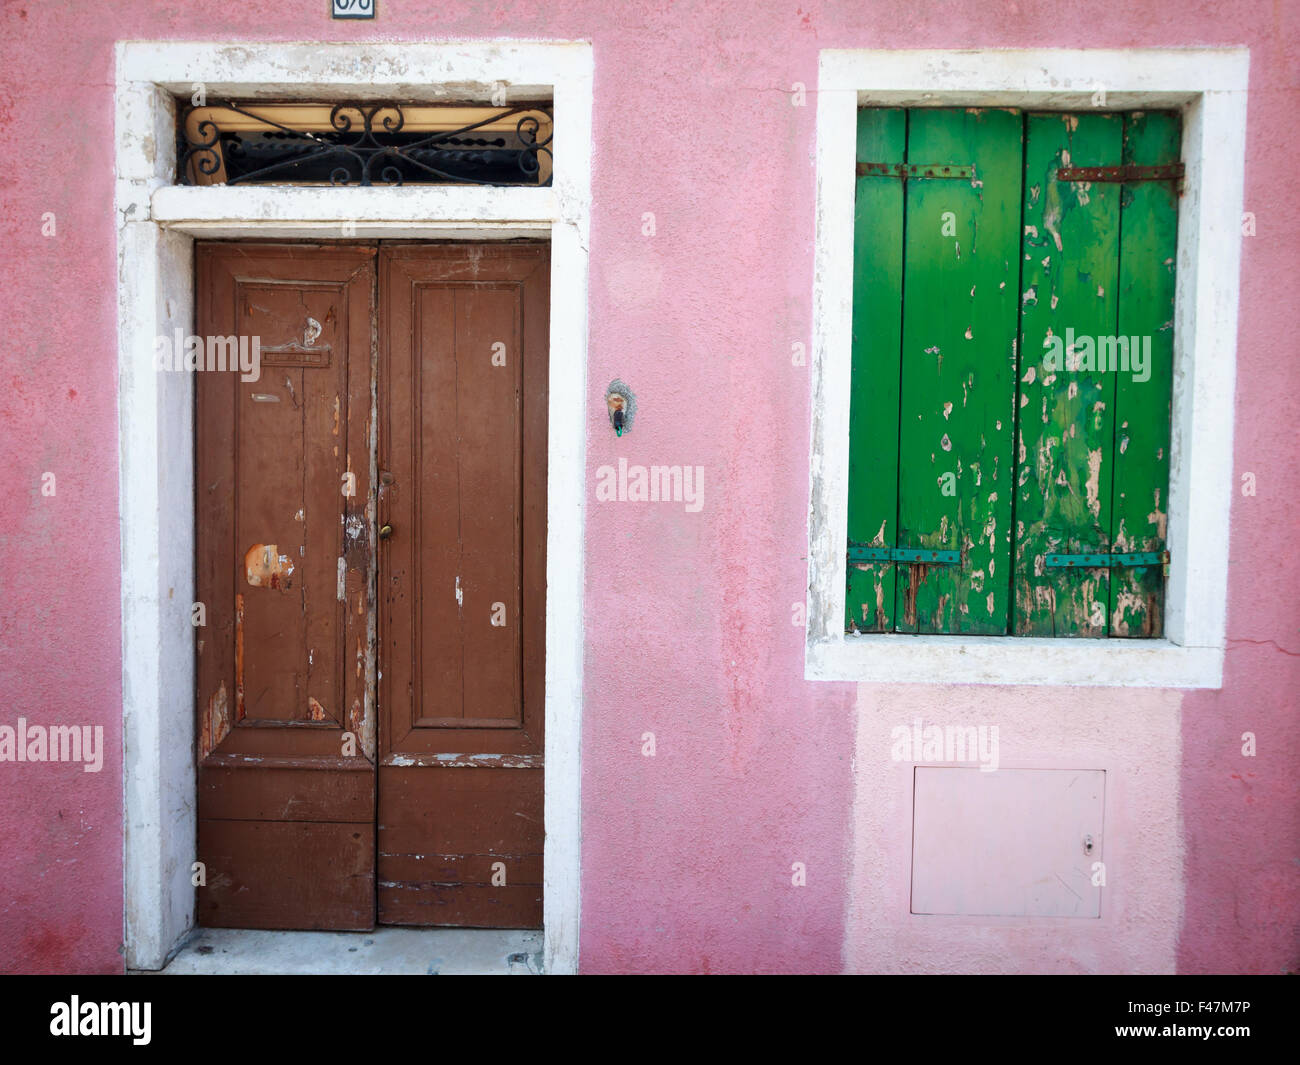 Door, Window, Pink Shutter, Old, Fame, House, Blue, Green, Brown, Steps, Shutters, Windows, Colour, Color, Colours, Colors, Stock Photo